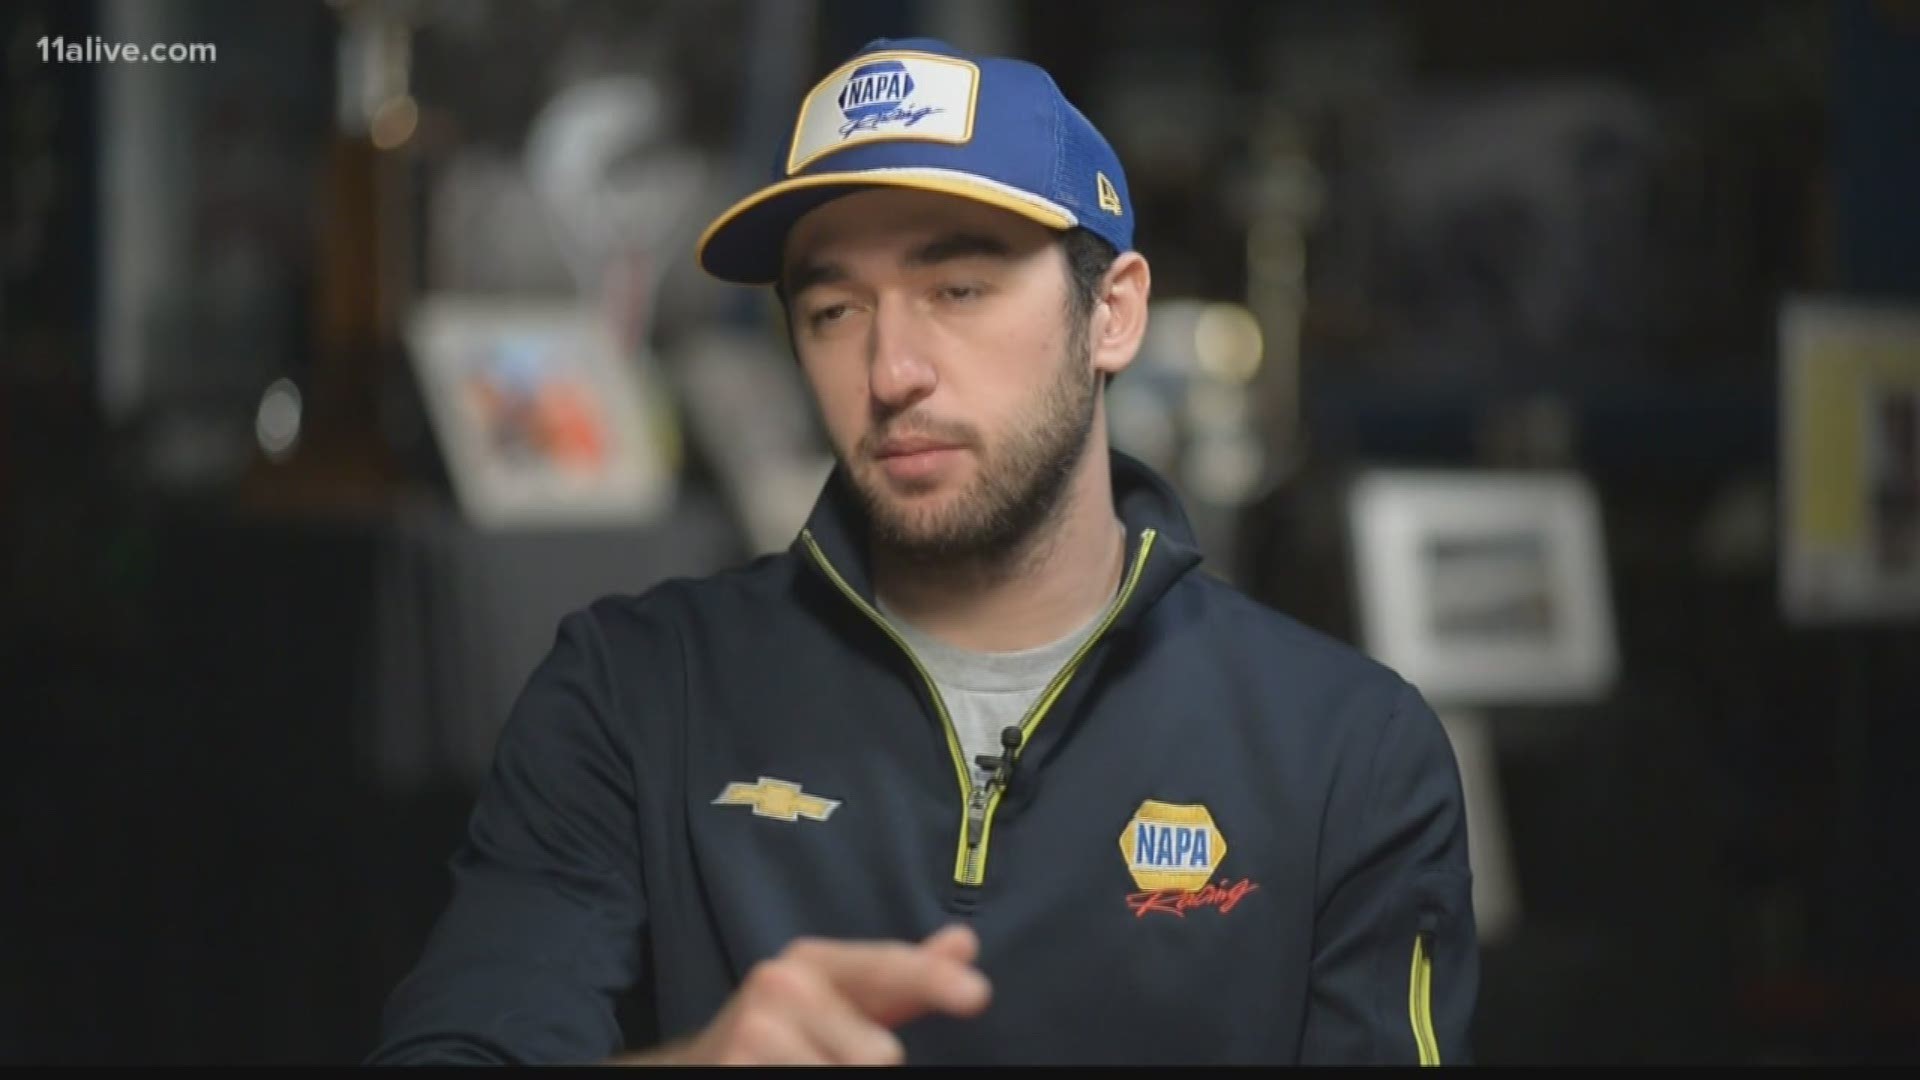 We sit down with Chase Elliott who said he's thankful Ryan Newman was able to walk out of the hospital.